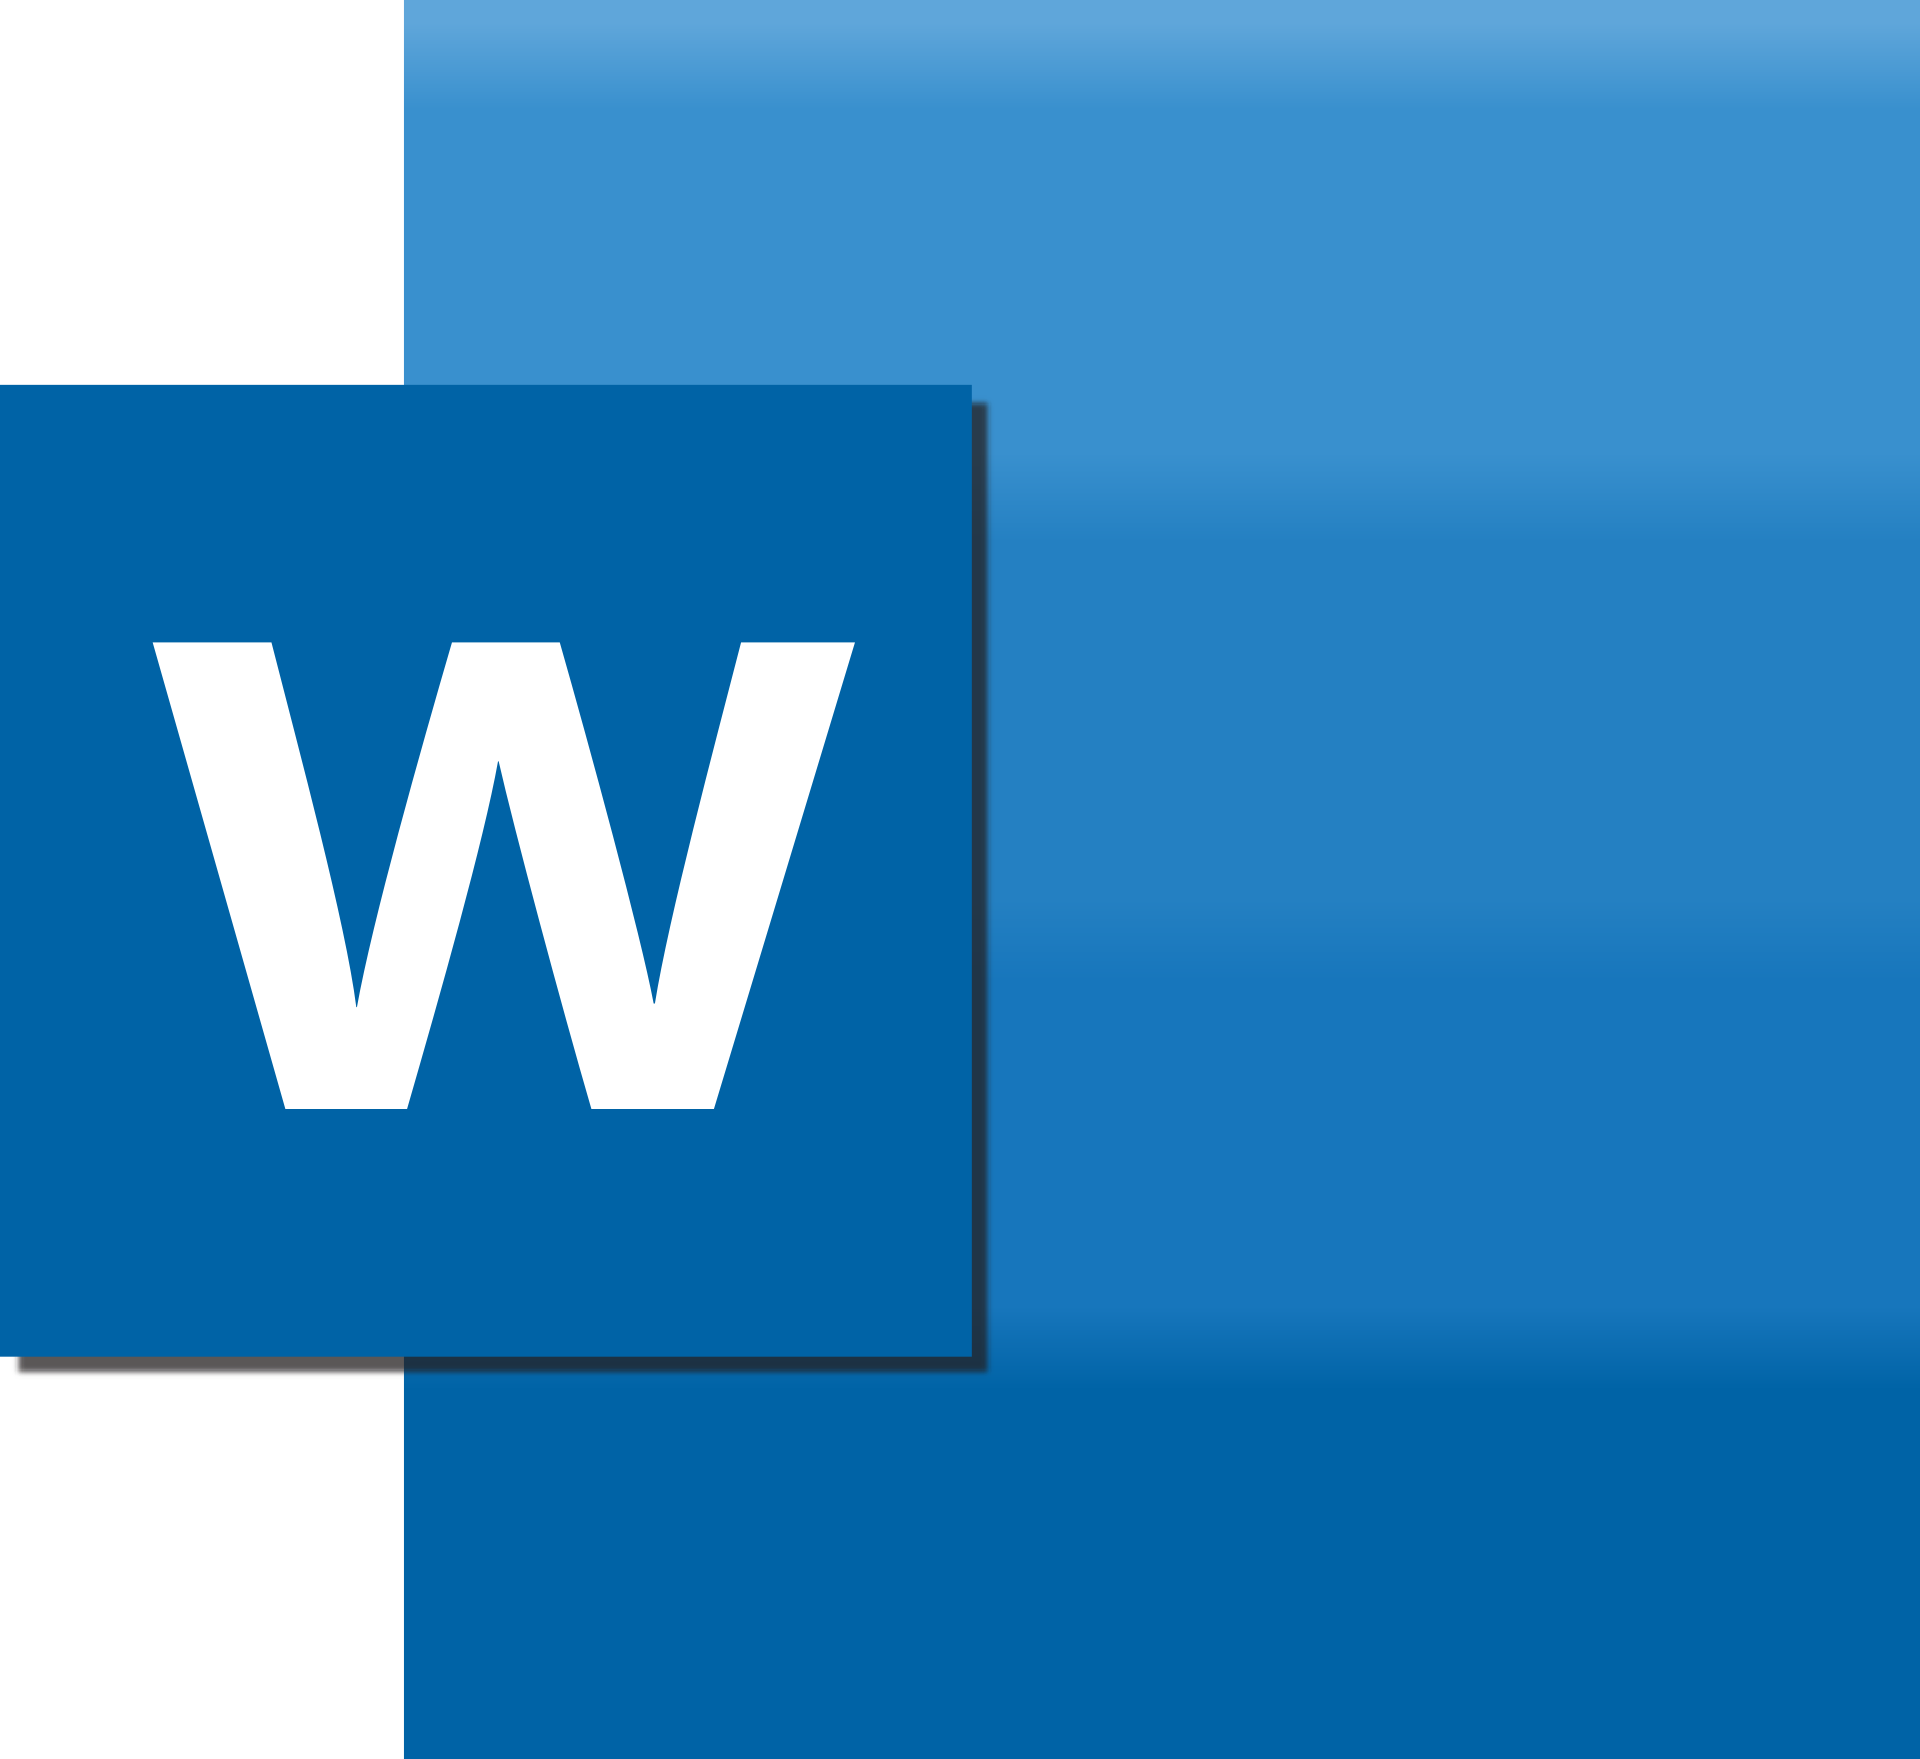 Advantages and Disadvantages of Microsoft Word - TurboFuture